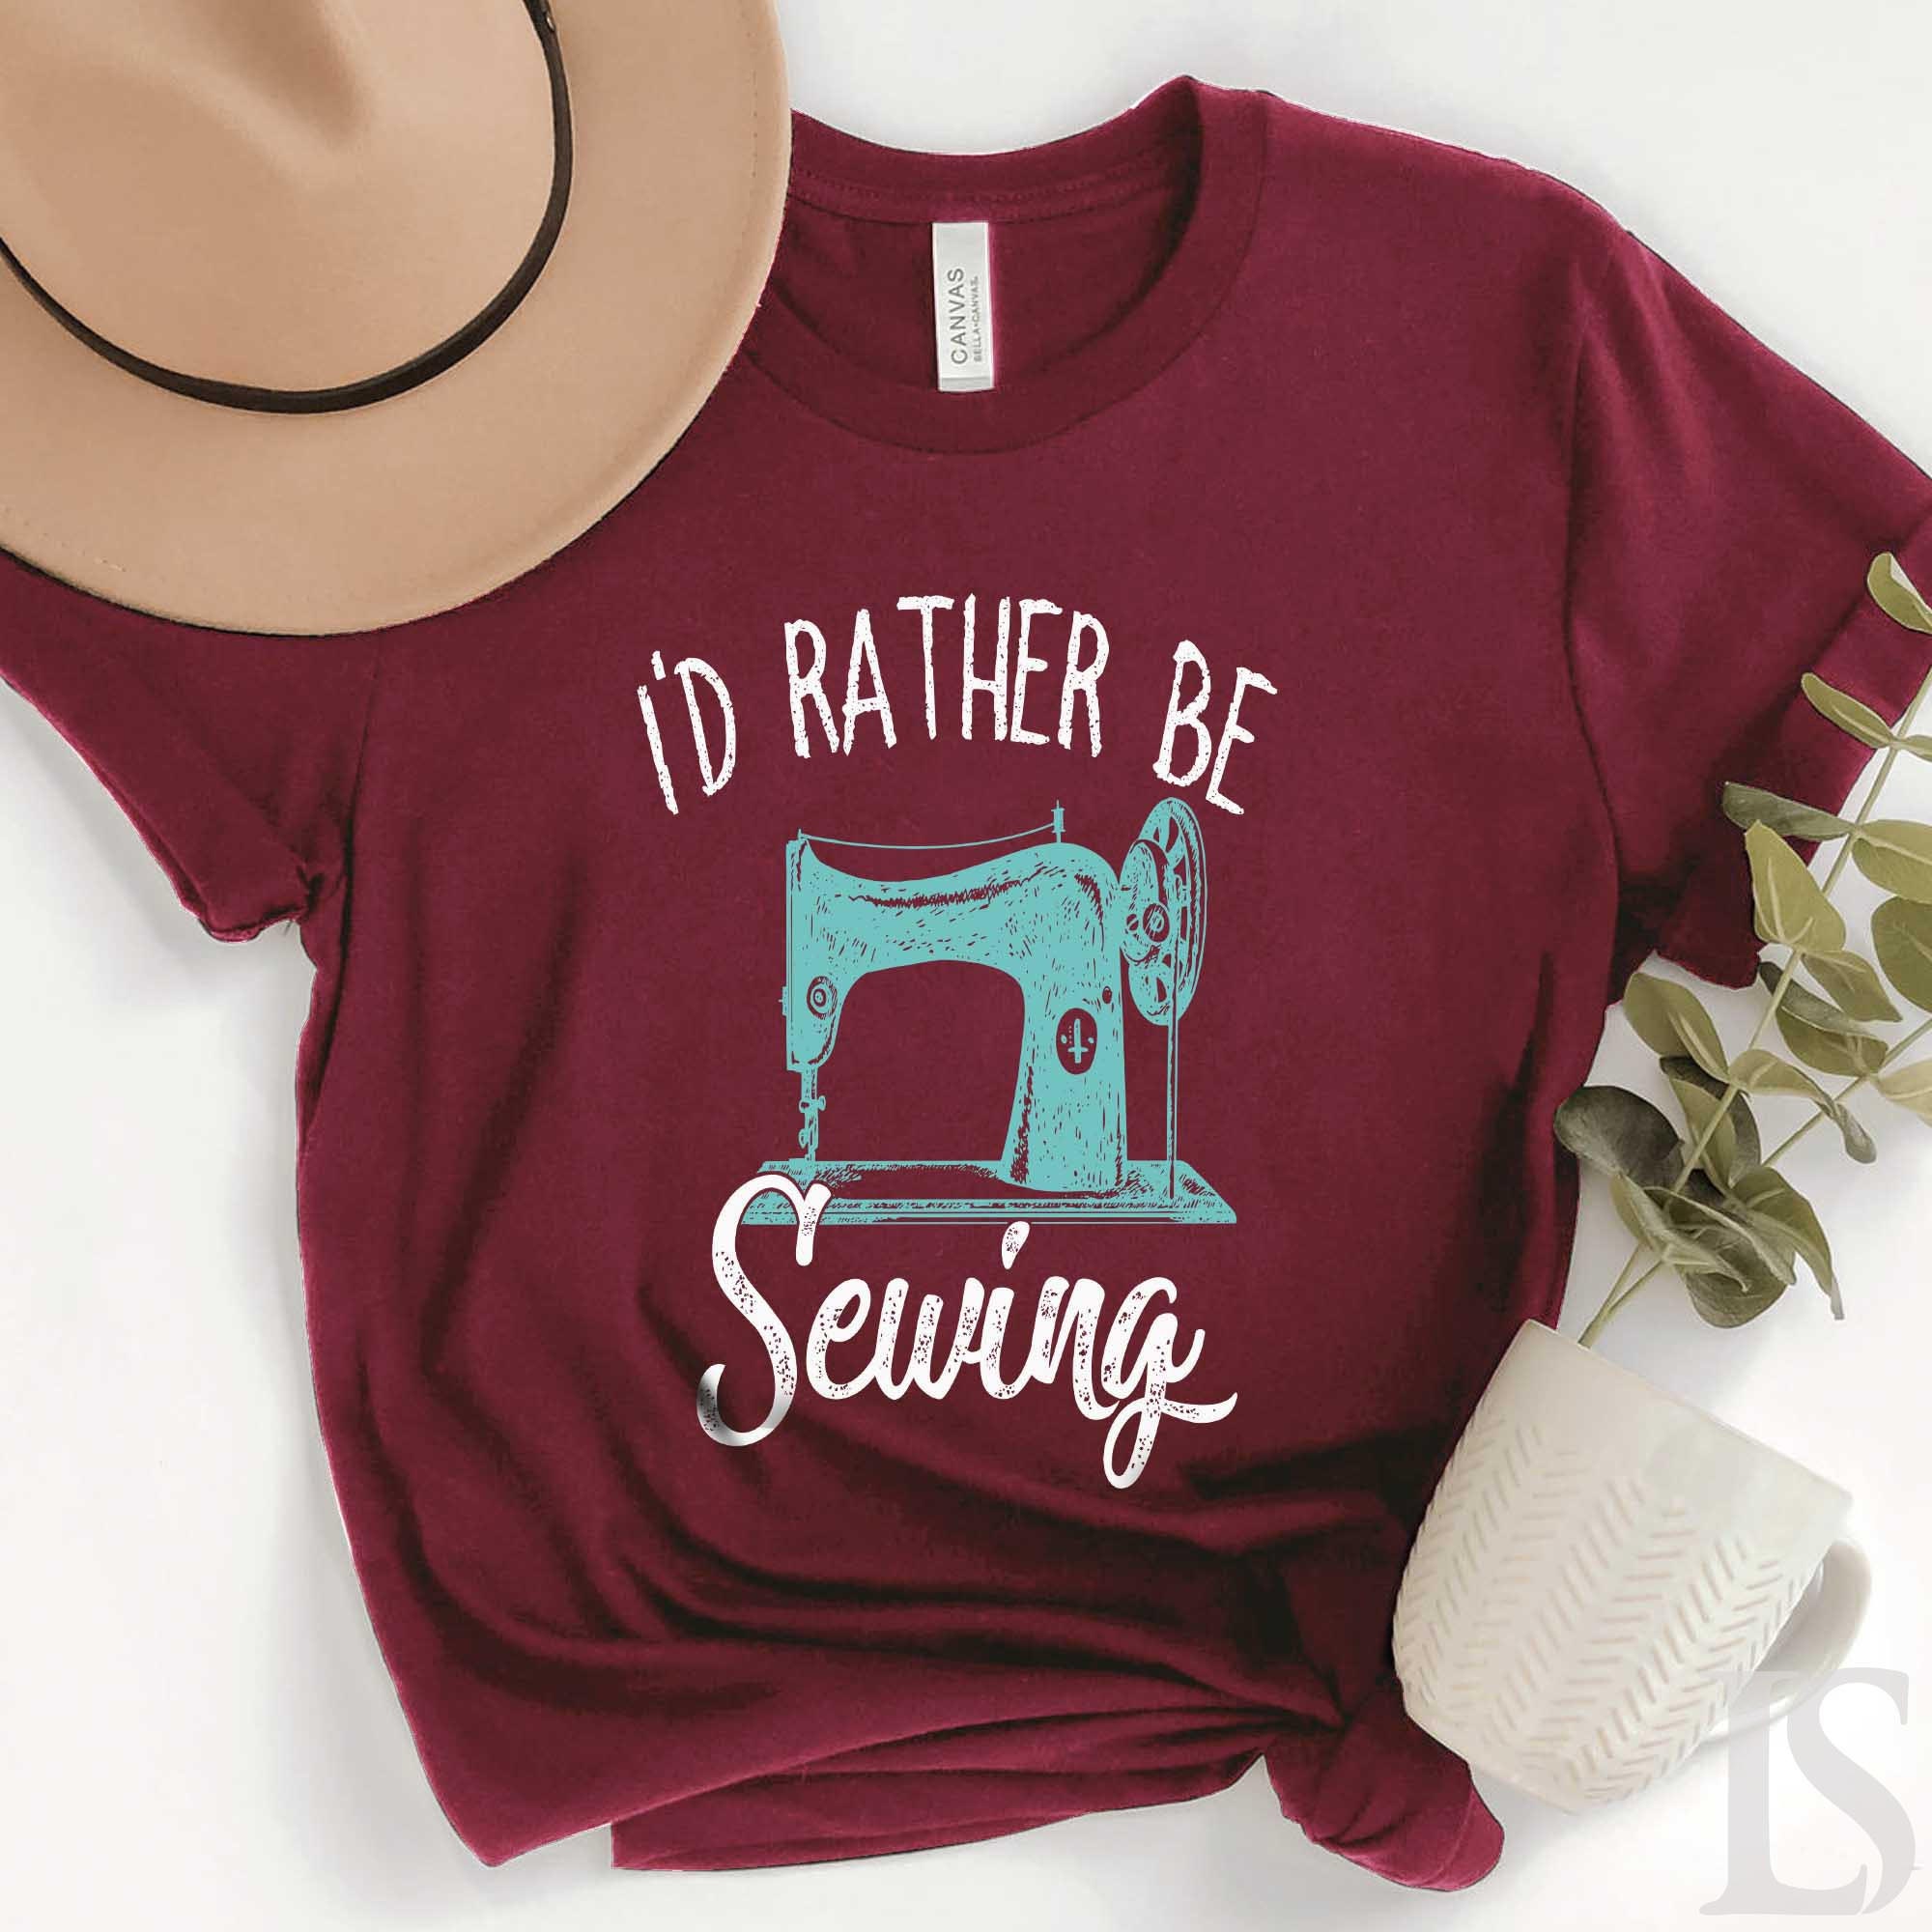 Sewing Gift Sewing Lover Gift I'd Rather Be Sewing Shirt Sewing Shirt Sewing Lover Sewing Gift Women Love Sewing Funny Sewing Gift